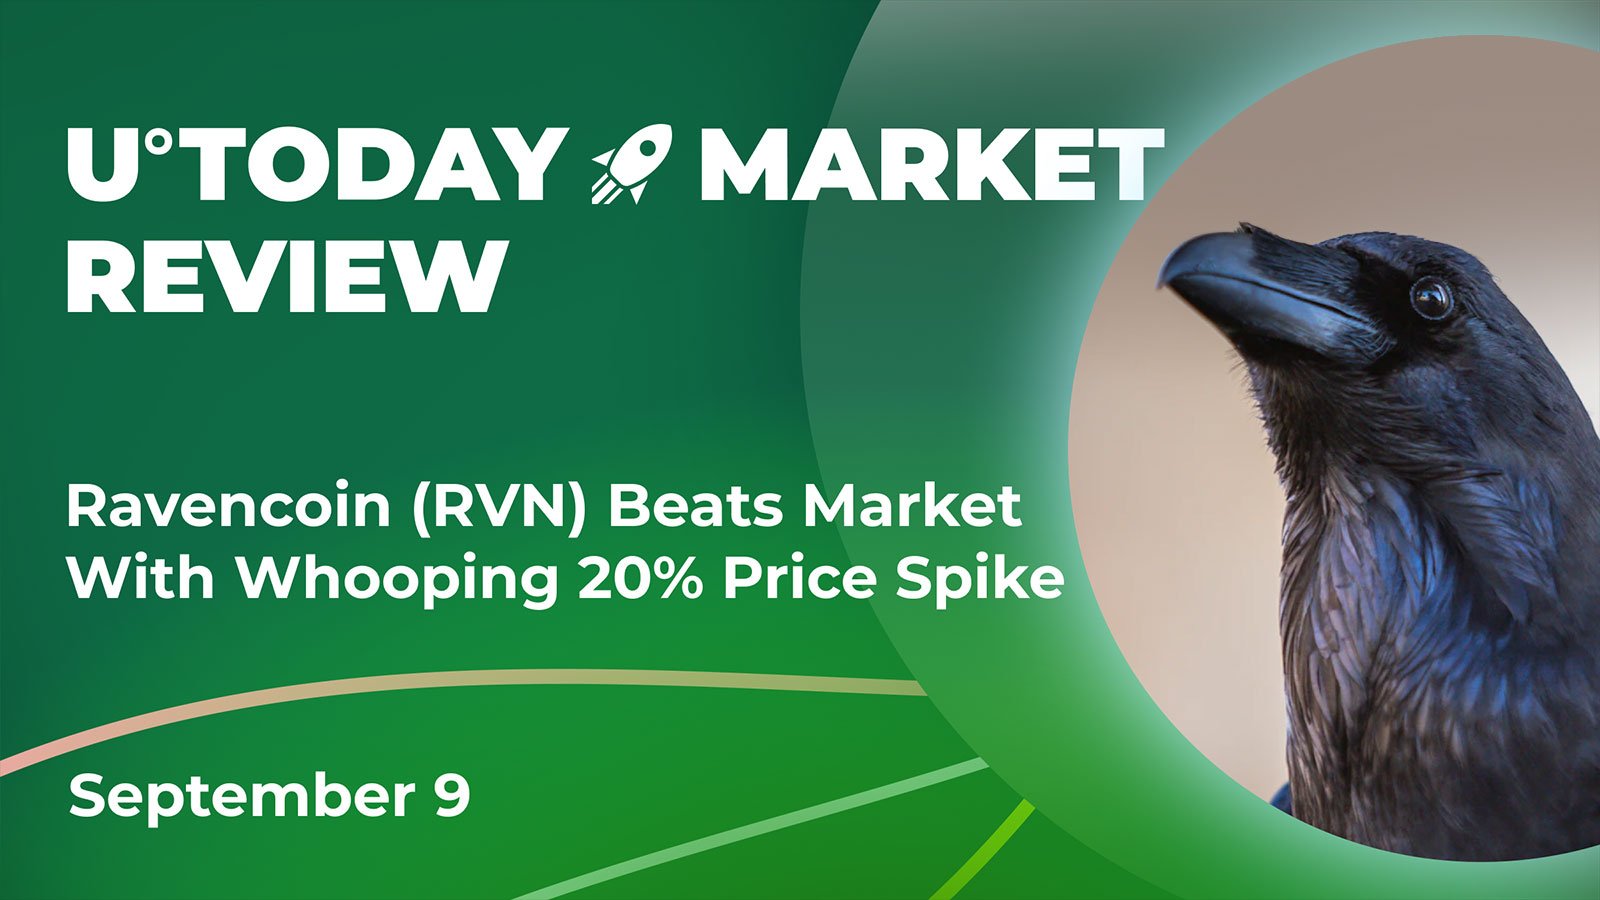 Ravencoin (RVN) Beats Market With Whooping 20% Price Spike: Crypto Market Review, September 9